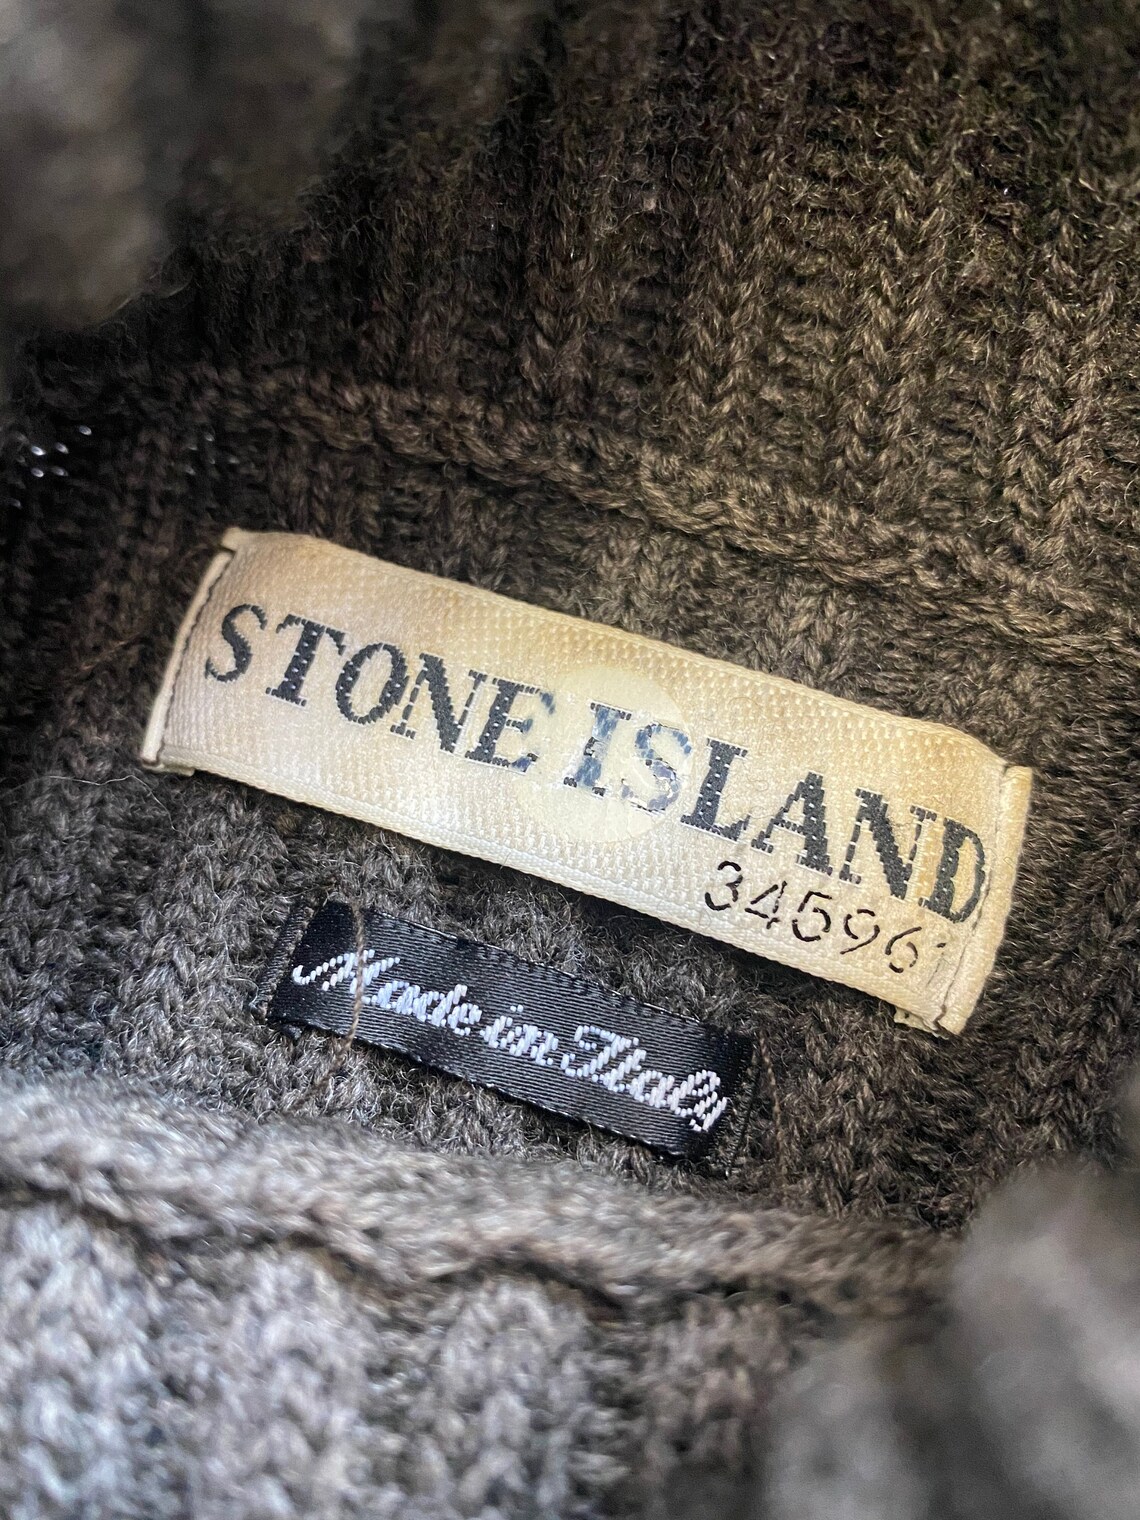 Stone island sweater vintage 2001 / brown RARE / size M | Etsy